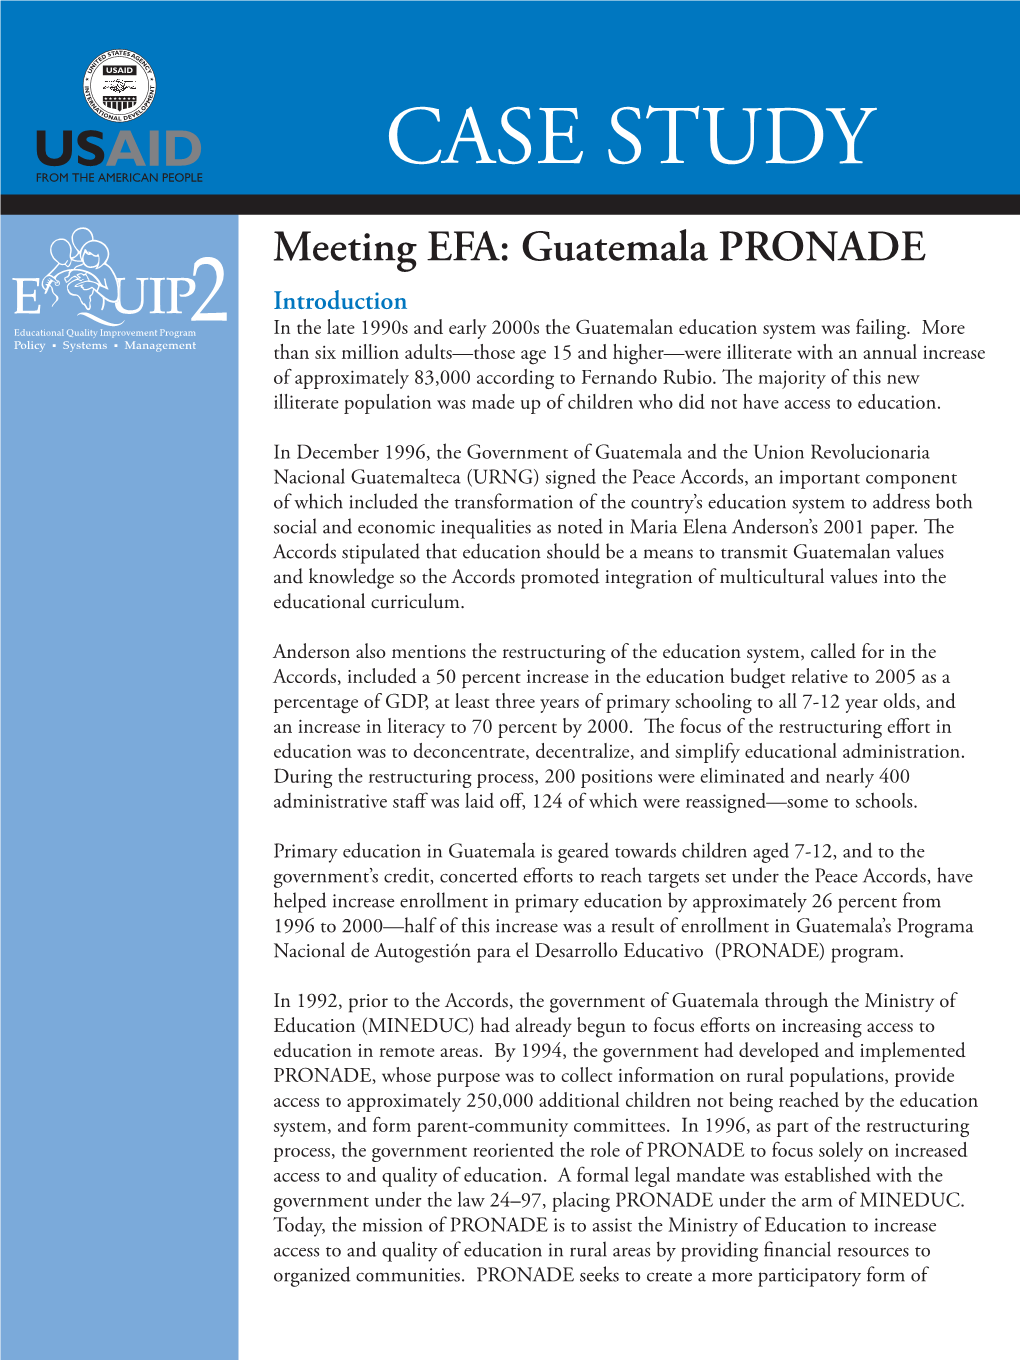 Meeting EFA: Guatemala PRONADE Introduction in the Late 1990S and Early 2000S the Guatemalan Education System Was Failing